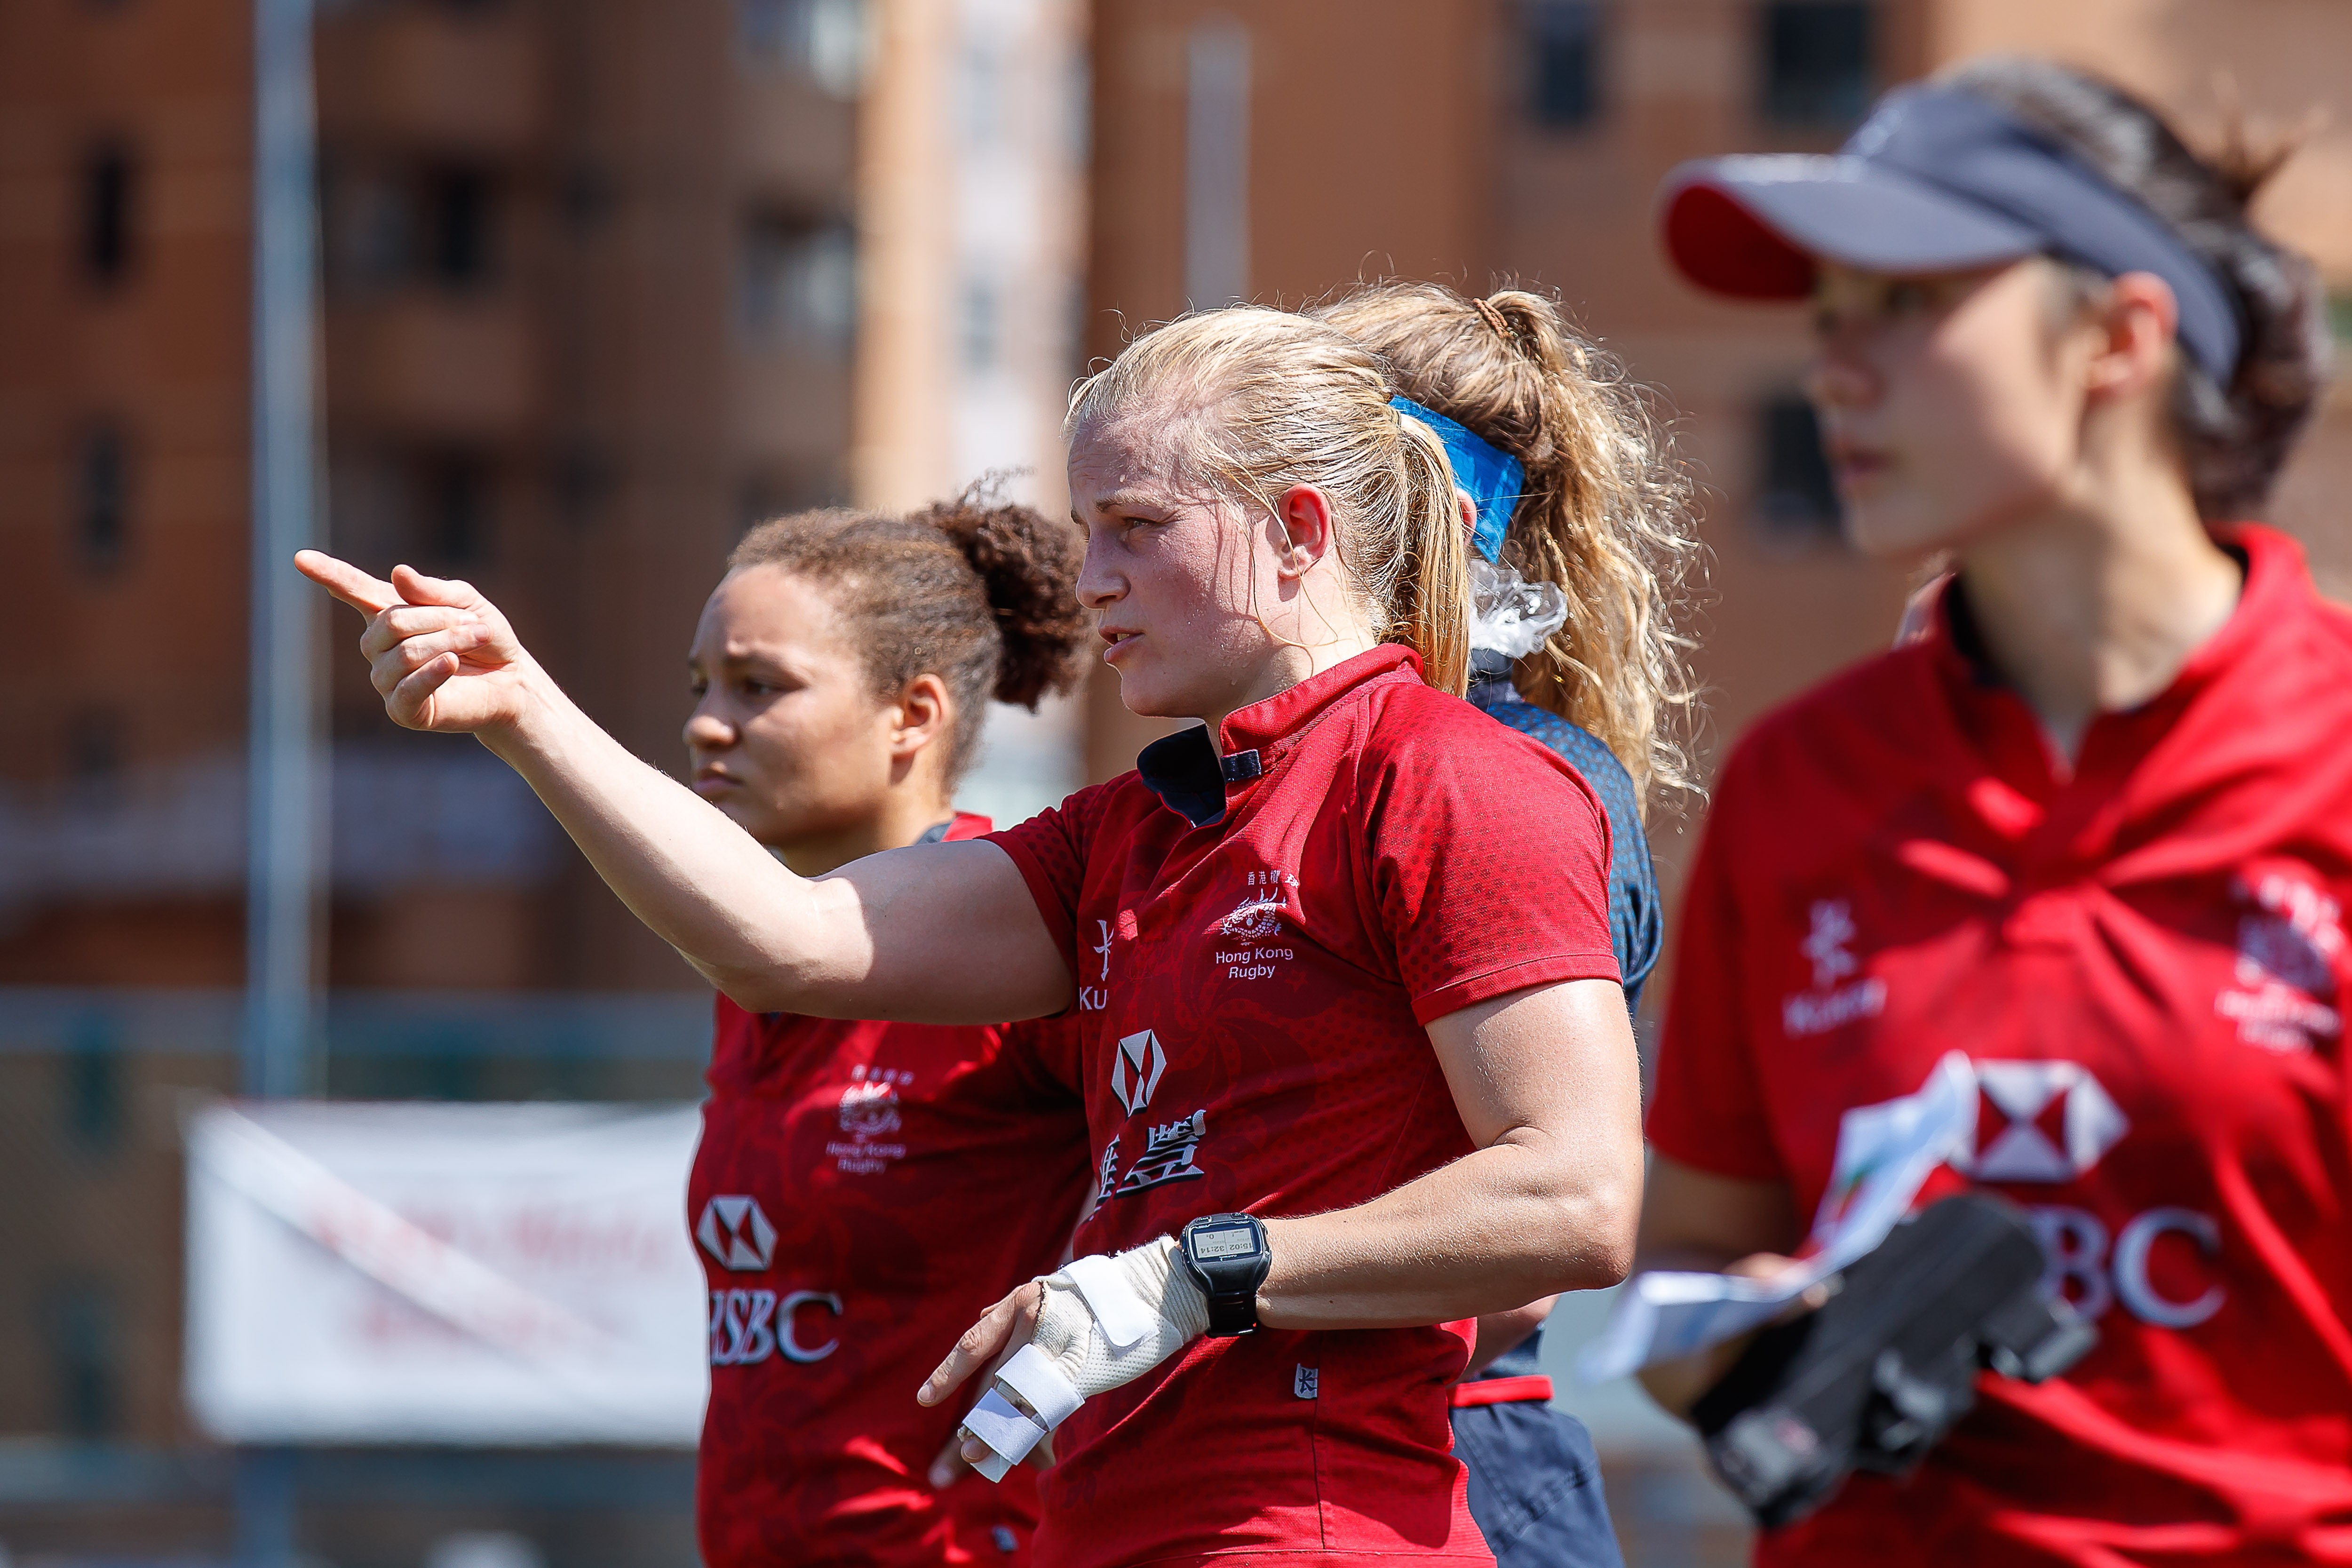 Hong Kong vice captain Adrienne Garvey is back in the side to face Wales. Photos: HKRU